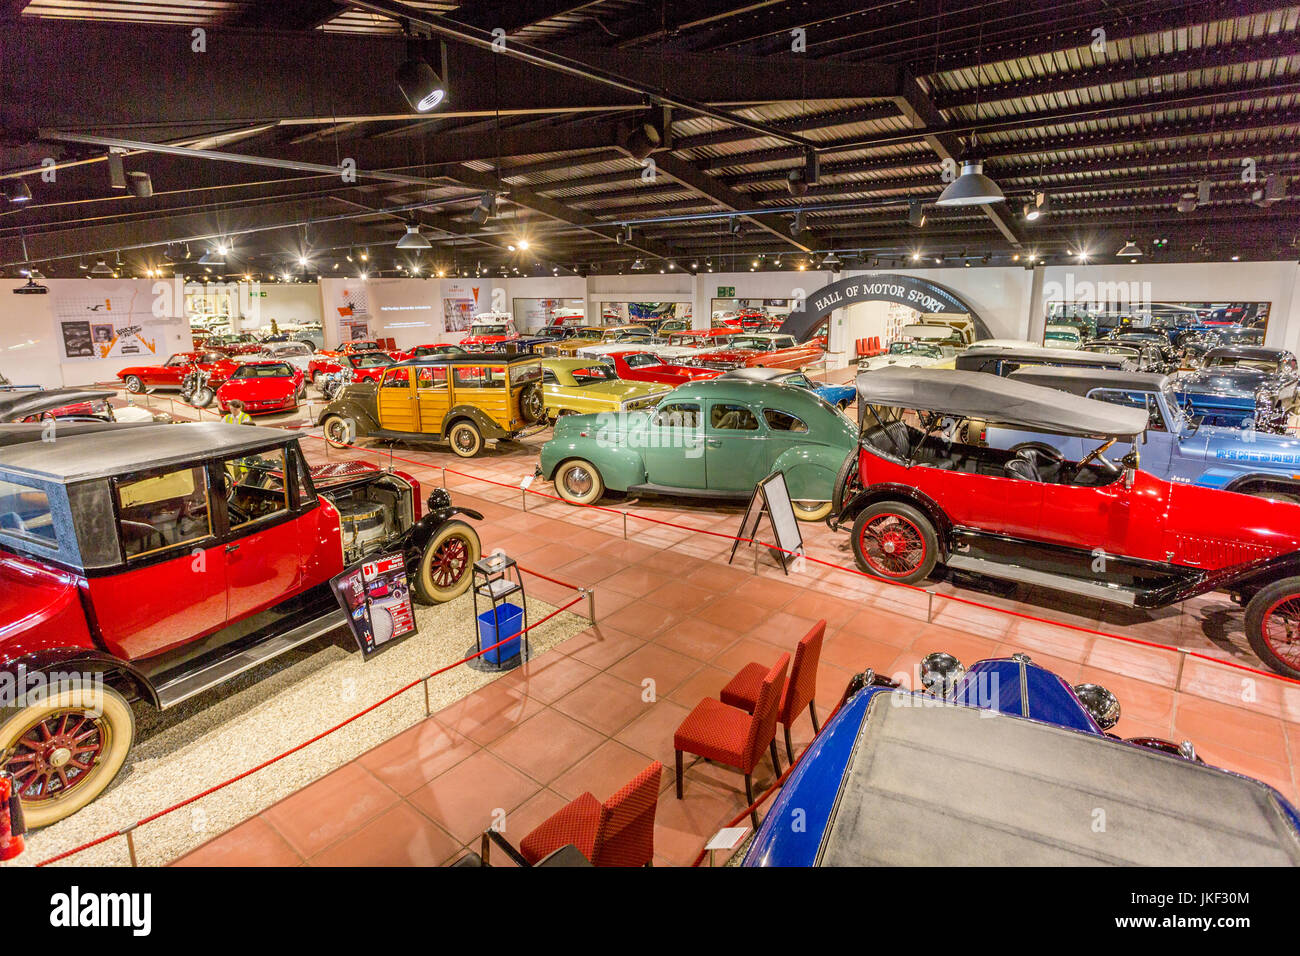 The Veteran Vintage and Edwardian Classics Hall in the Haynes International Motor Museum, Sparkford, Somerset, England, UK Stock Photo